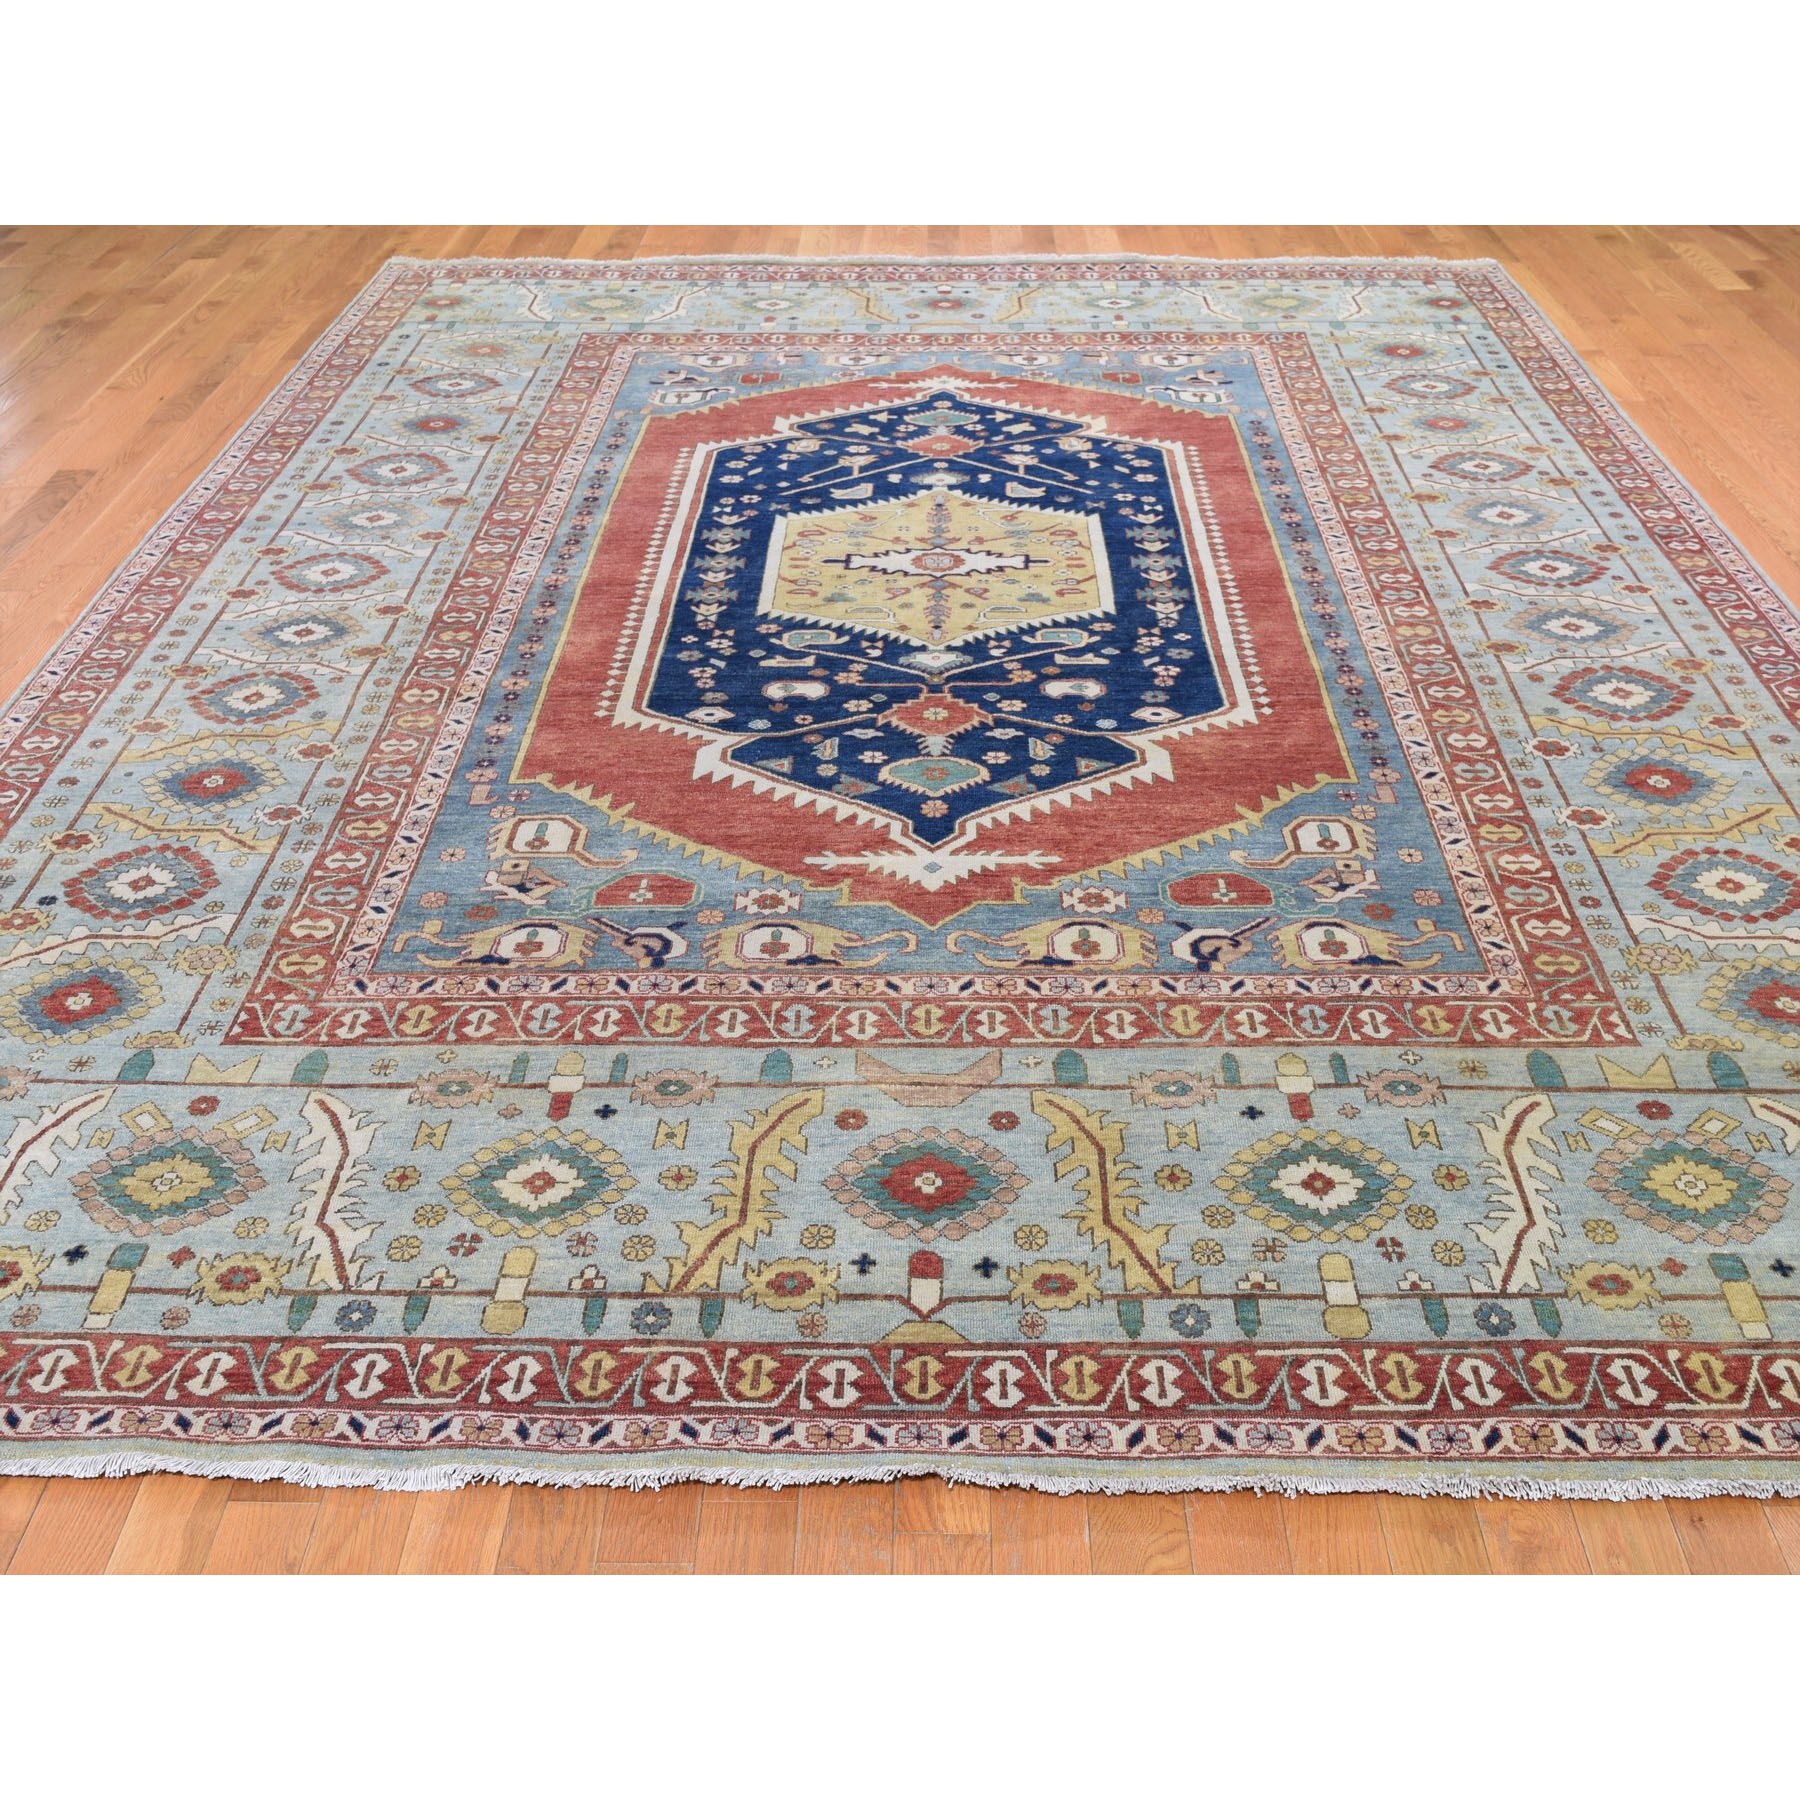 9-2 x12-2  Antiqued Bakshaish Re-creation Pure Wool Hand Knotted Oriental Rug 